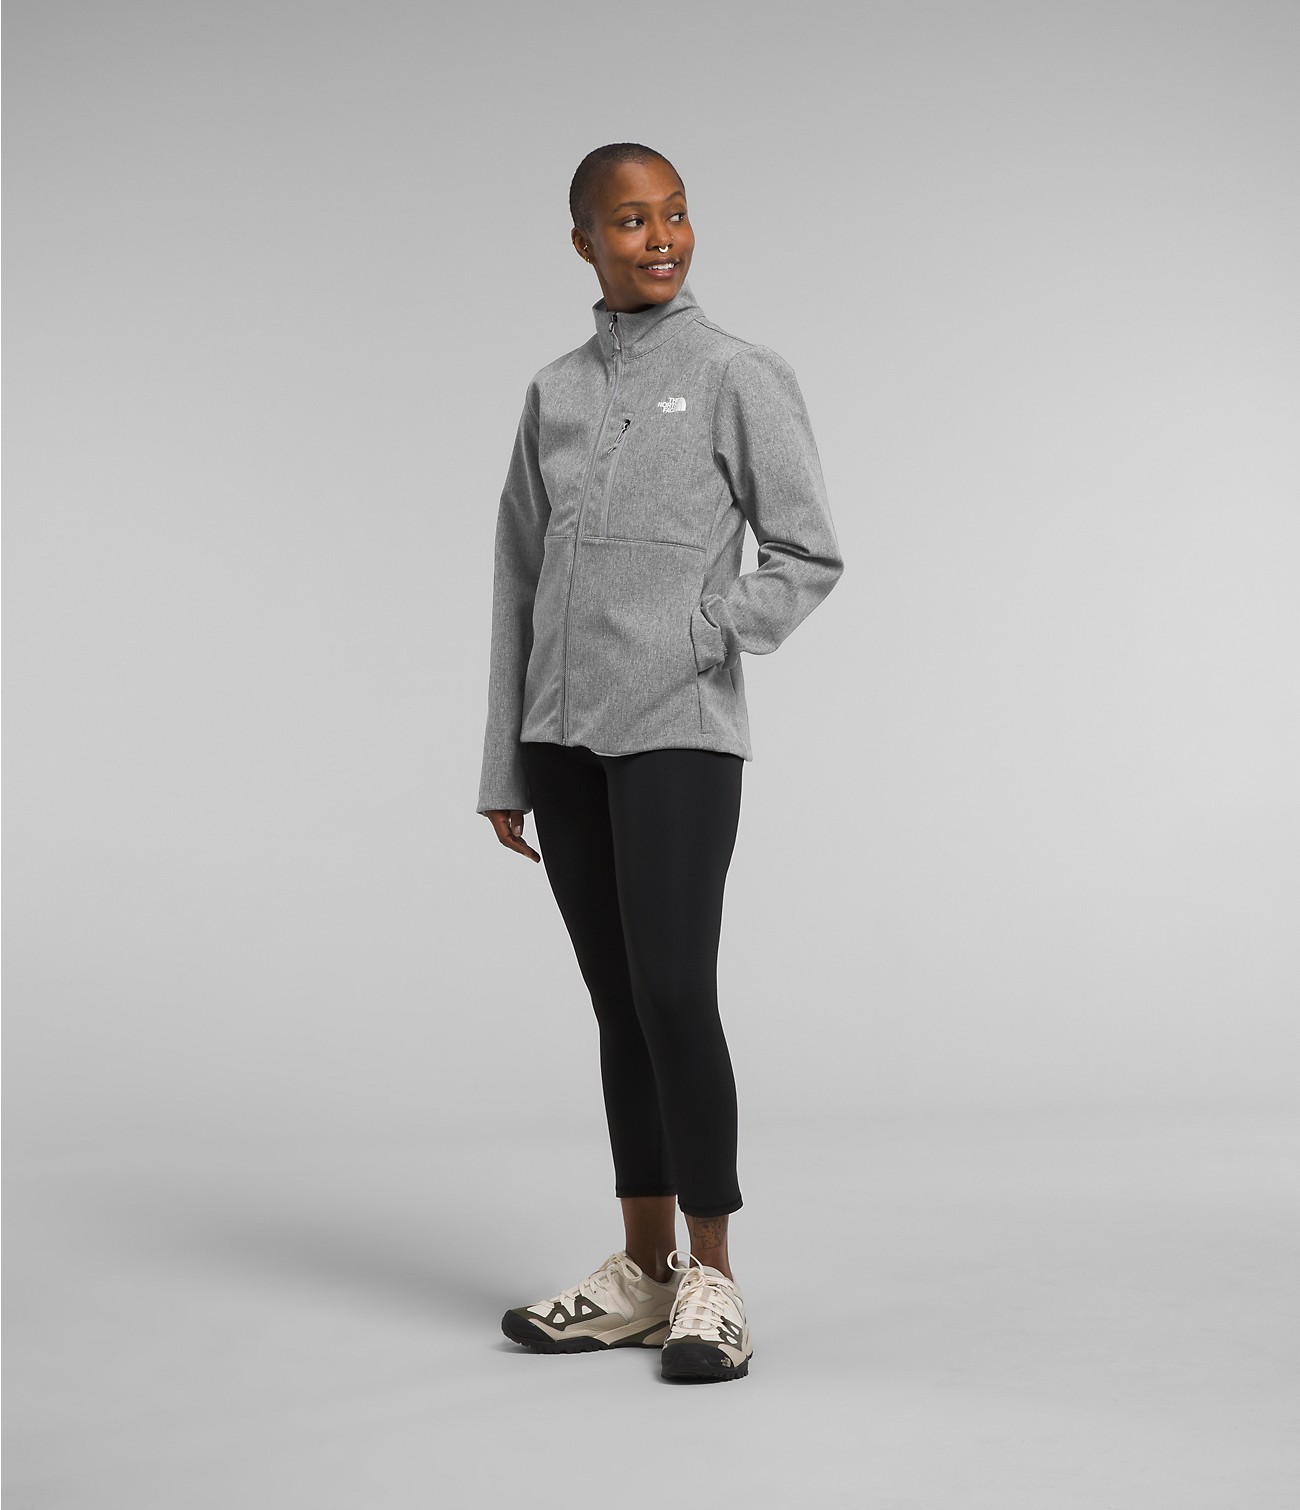 Women’s Apex Bionic 3 Jacket | The North Face